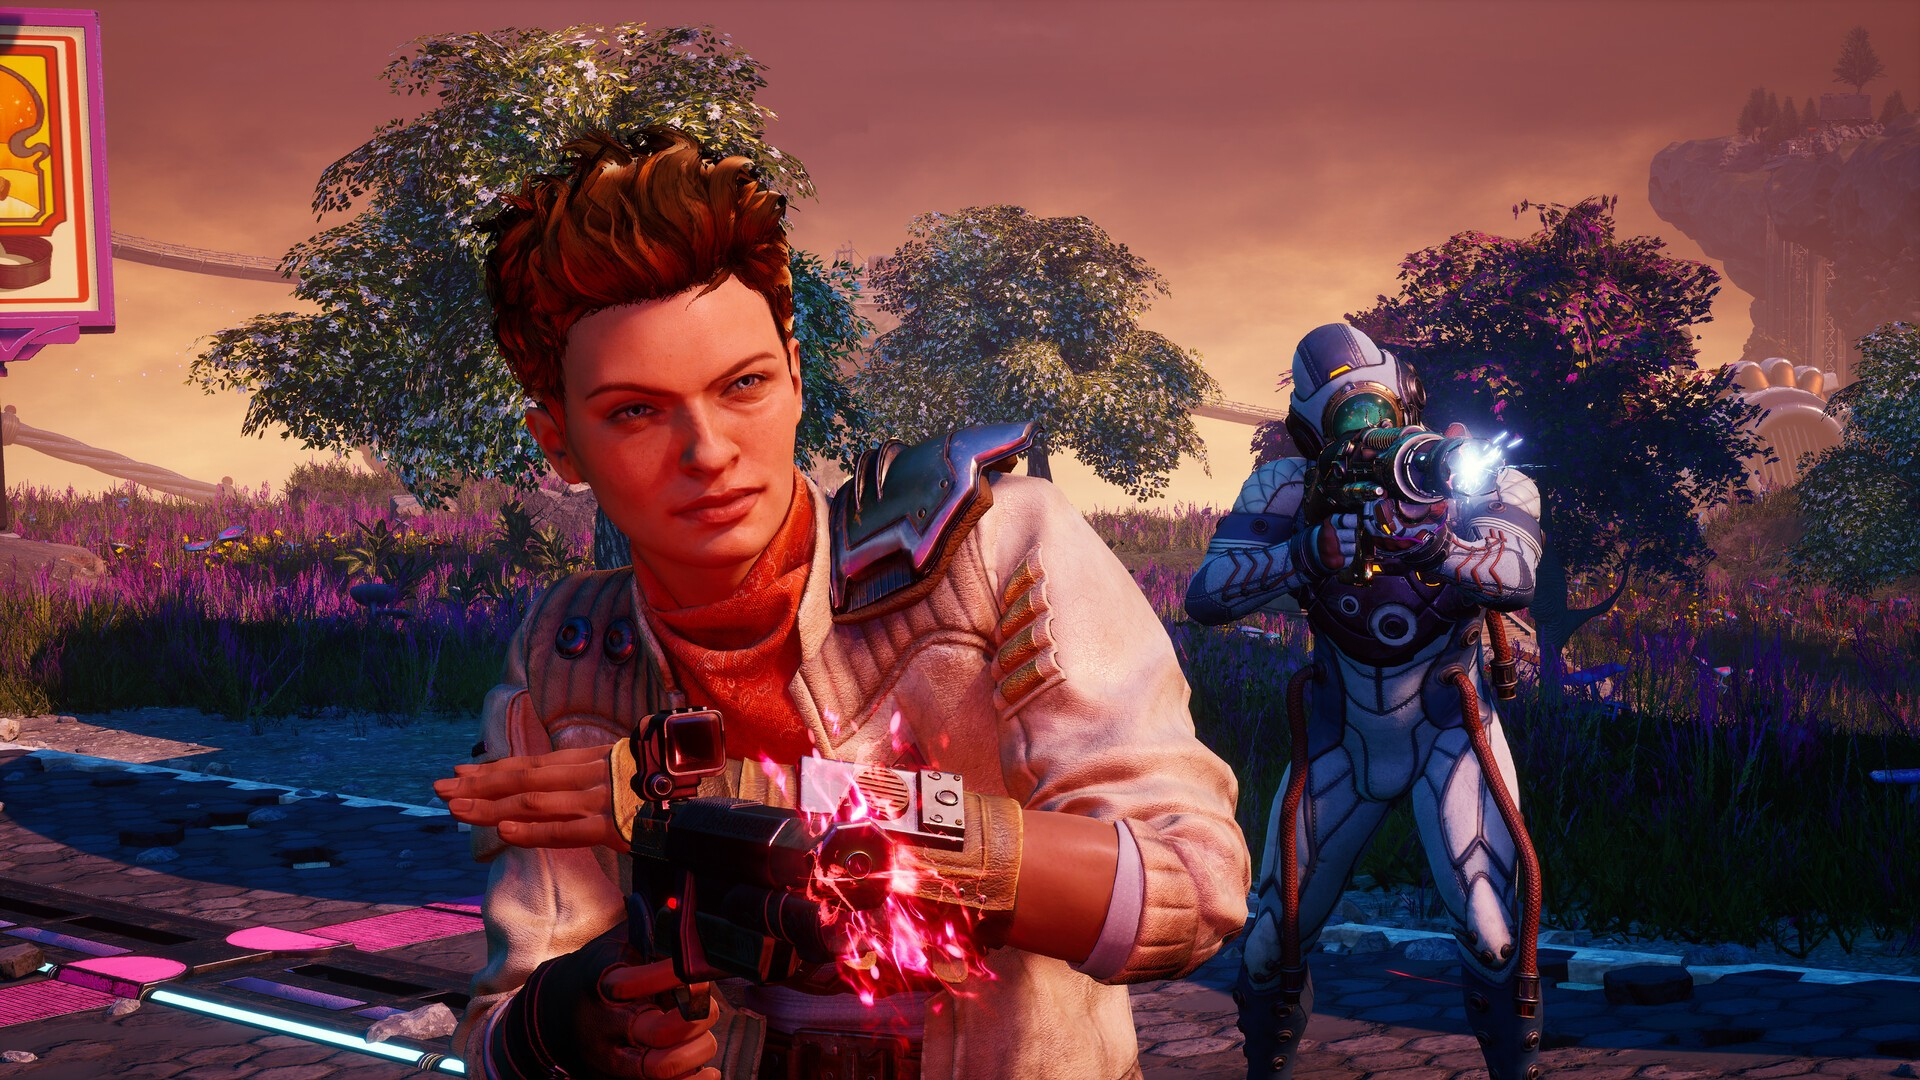 Скриншот из игры The Outer Worlds: Spacer